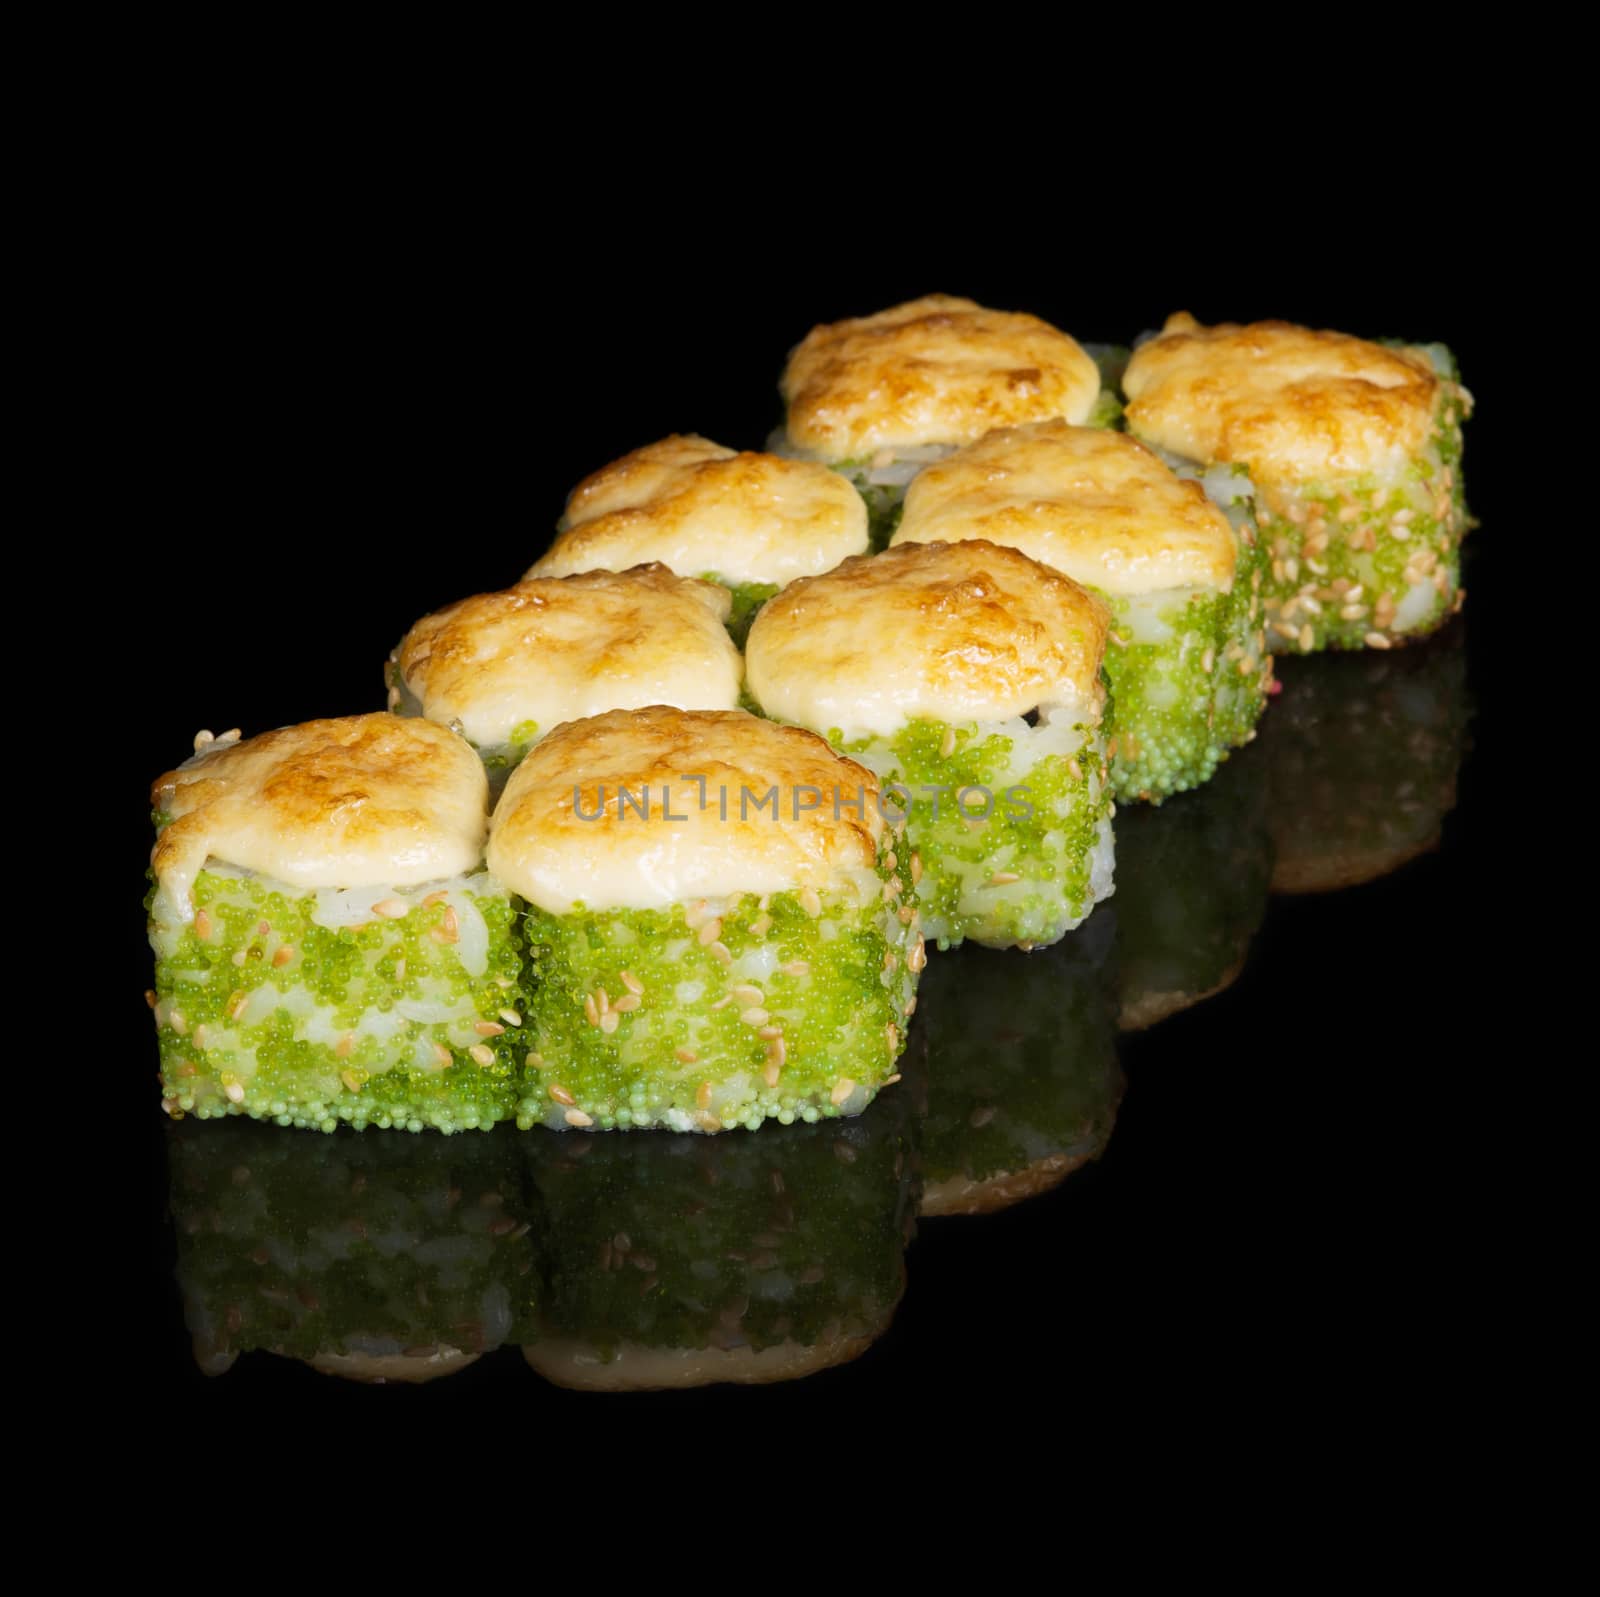 Grilled sushi rolls with caviar and cheese on  black background